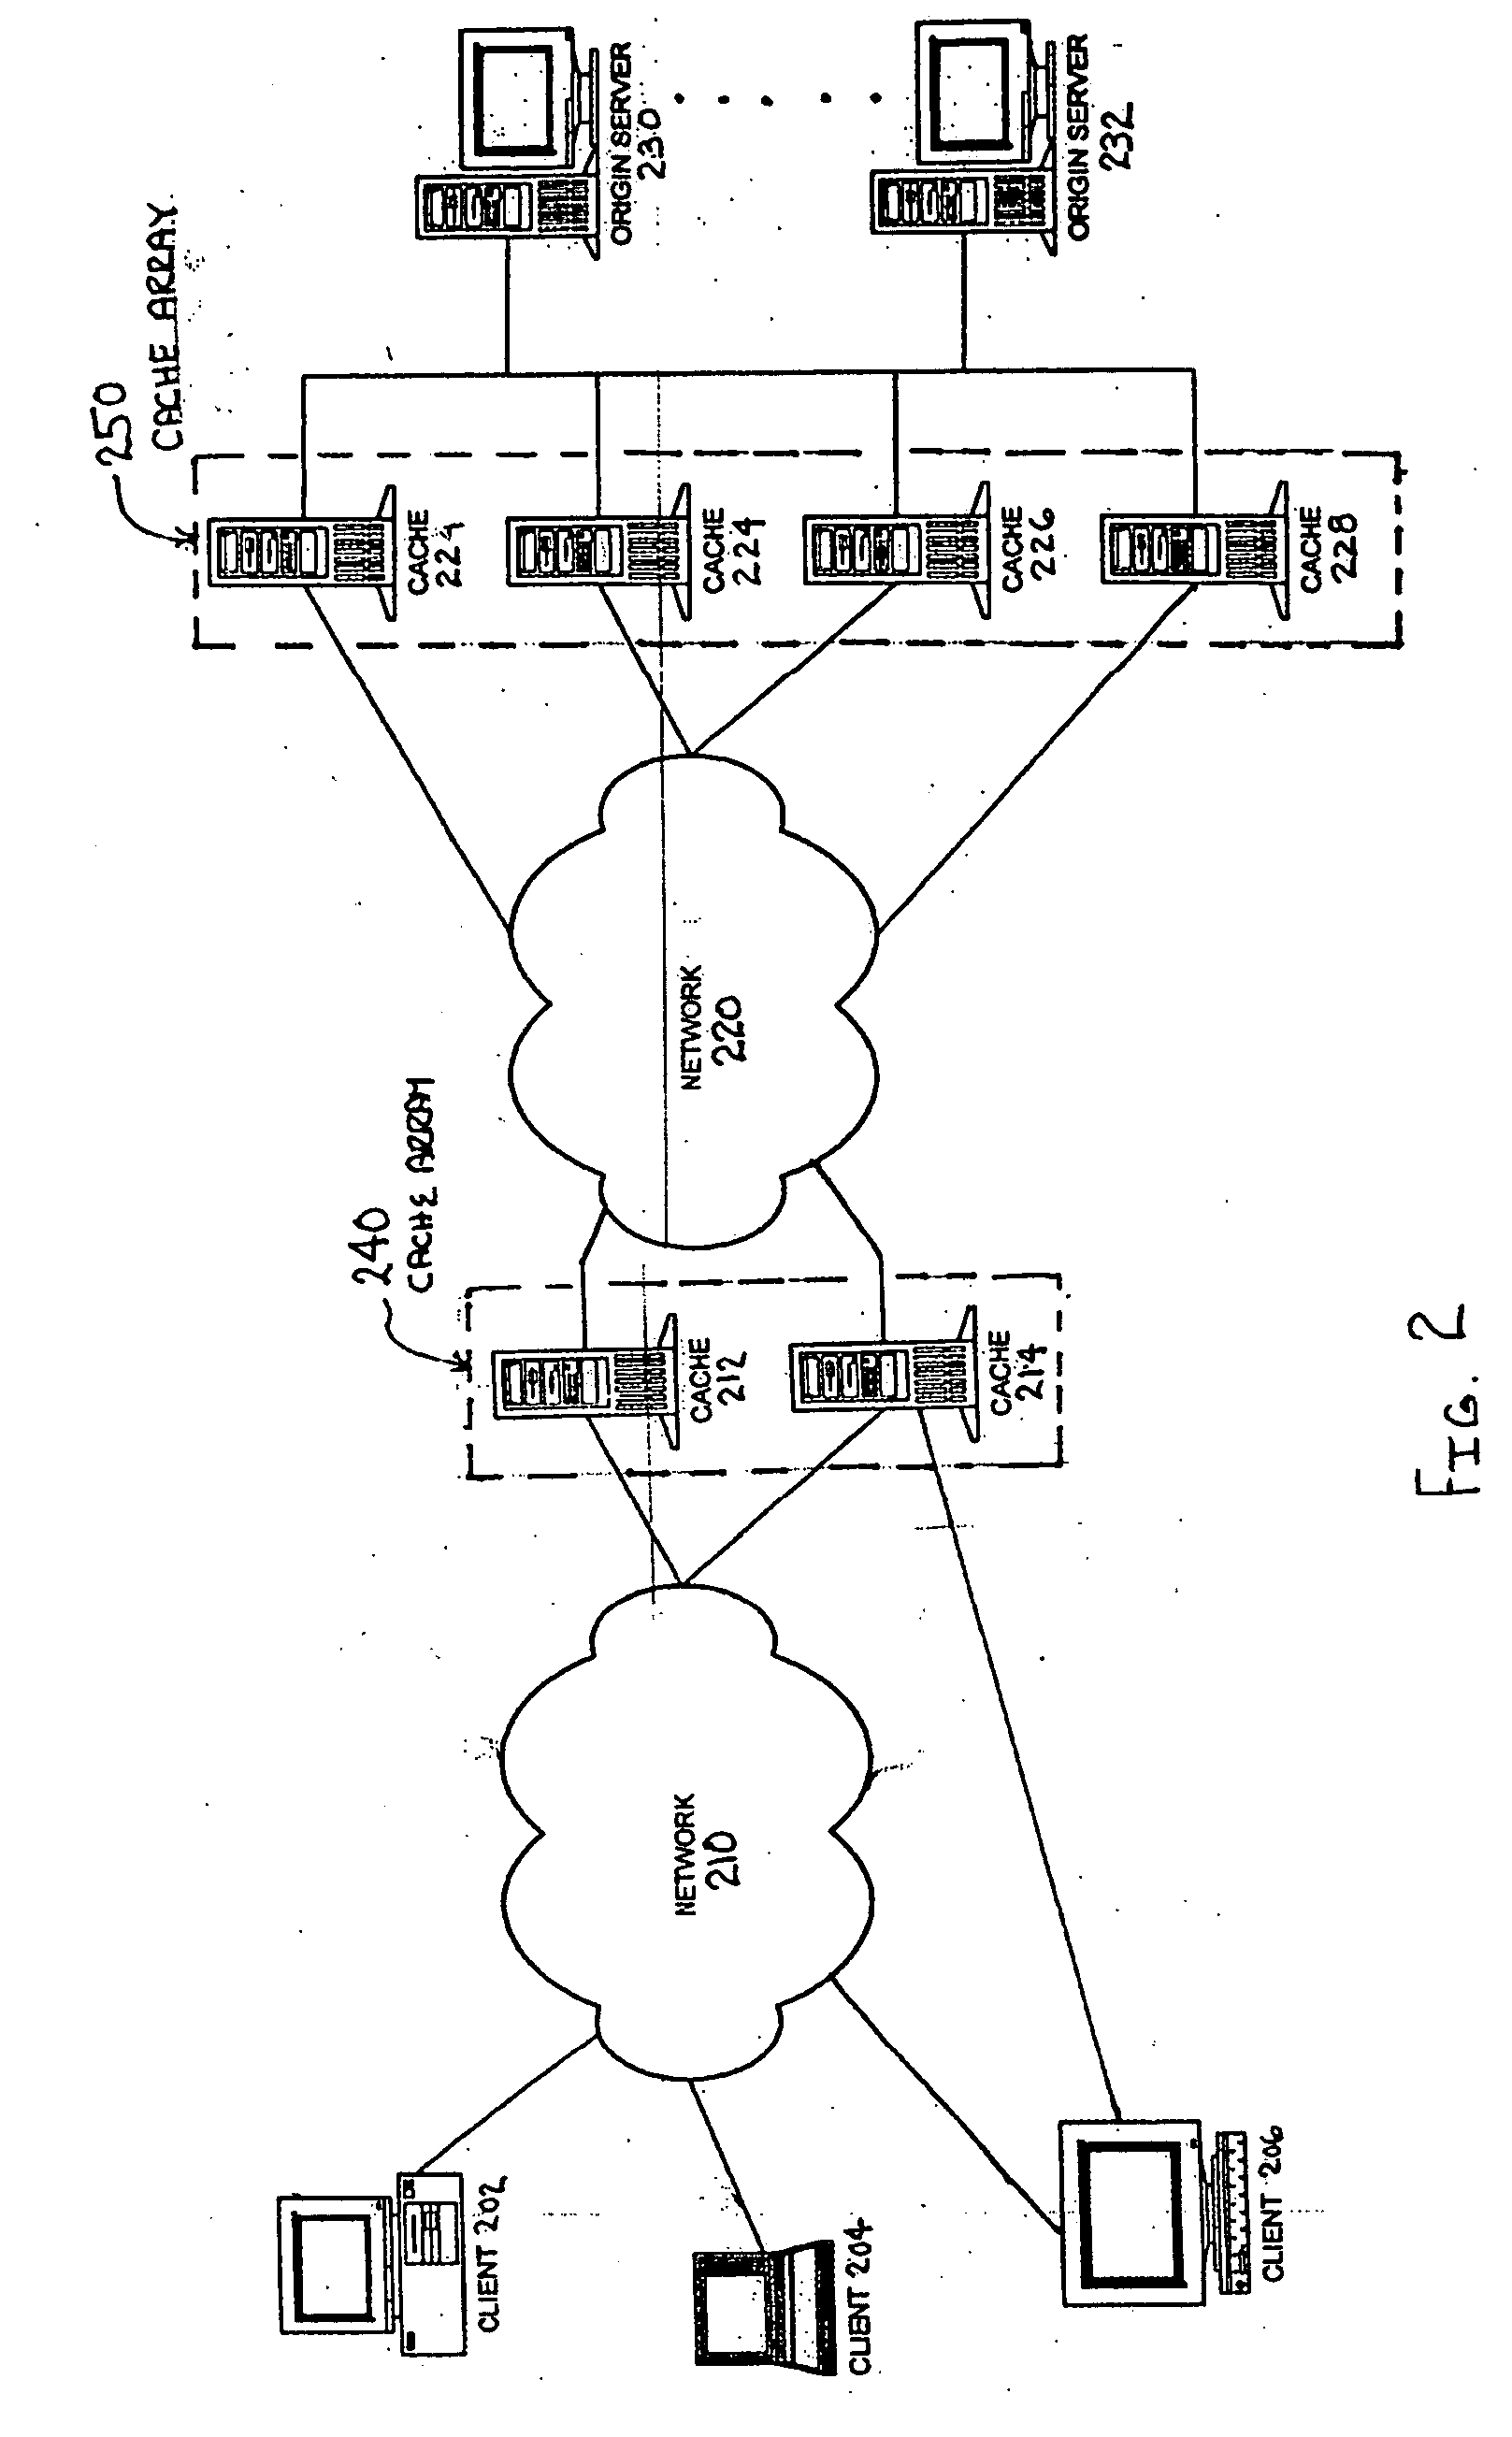 Deterministic session state management within a global cache array